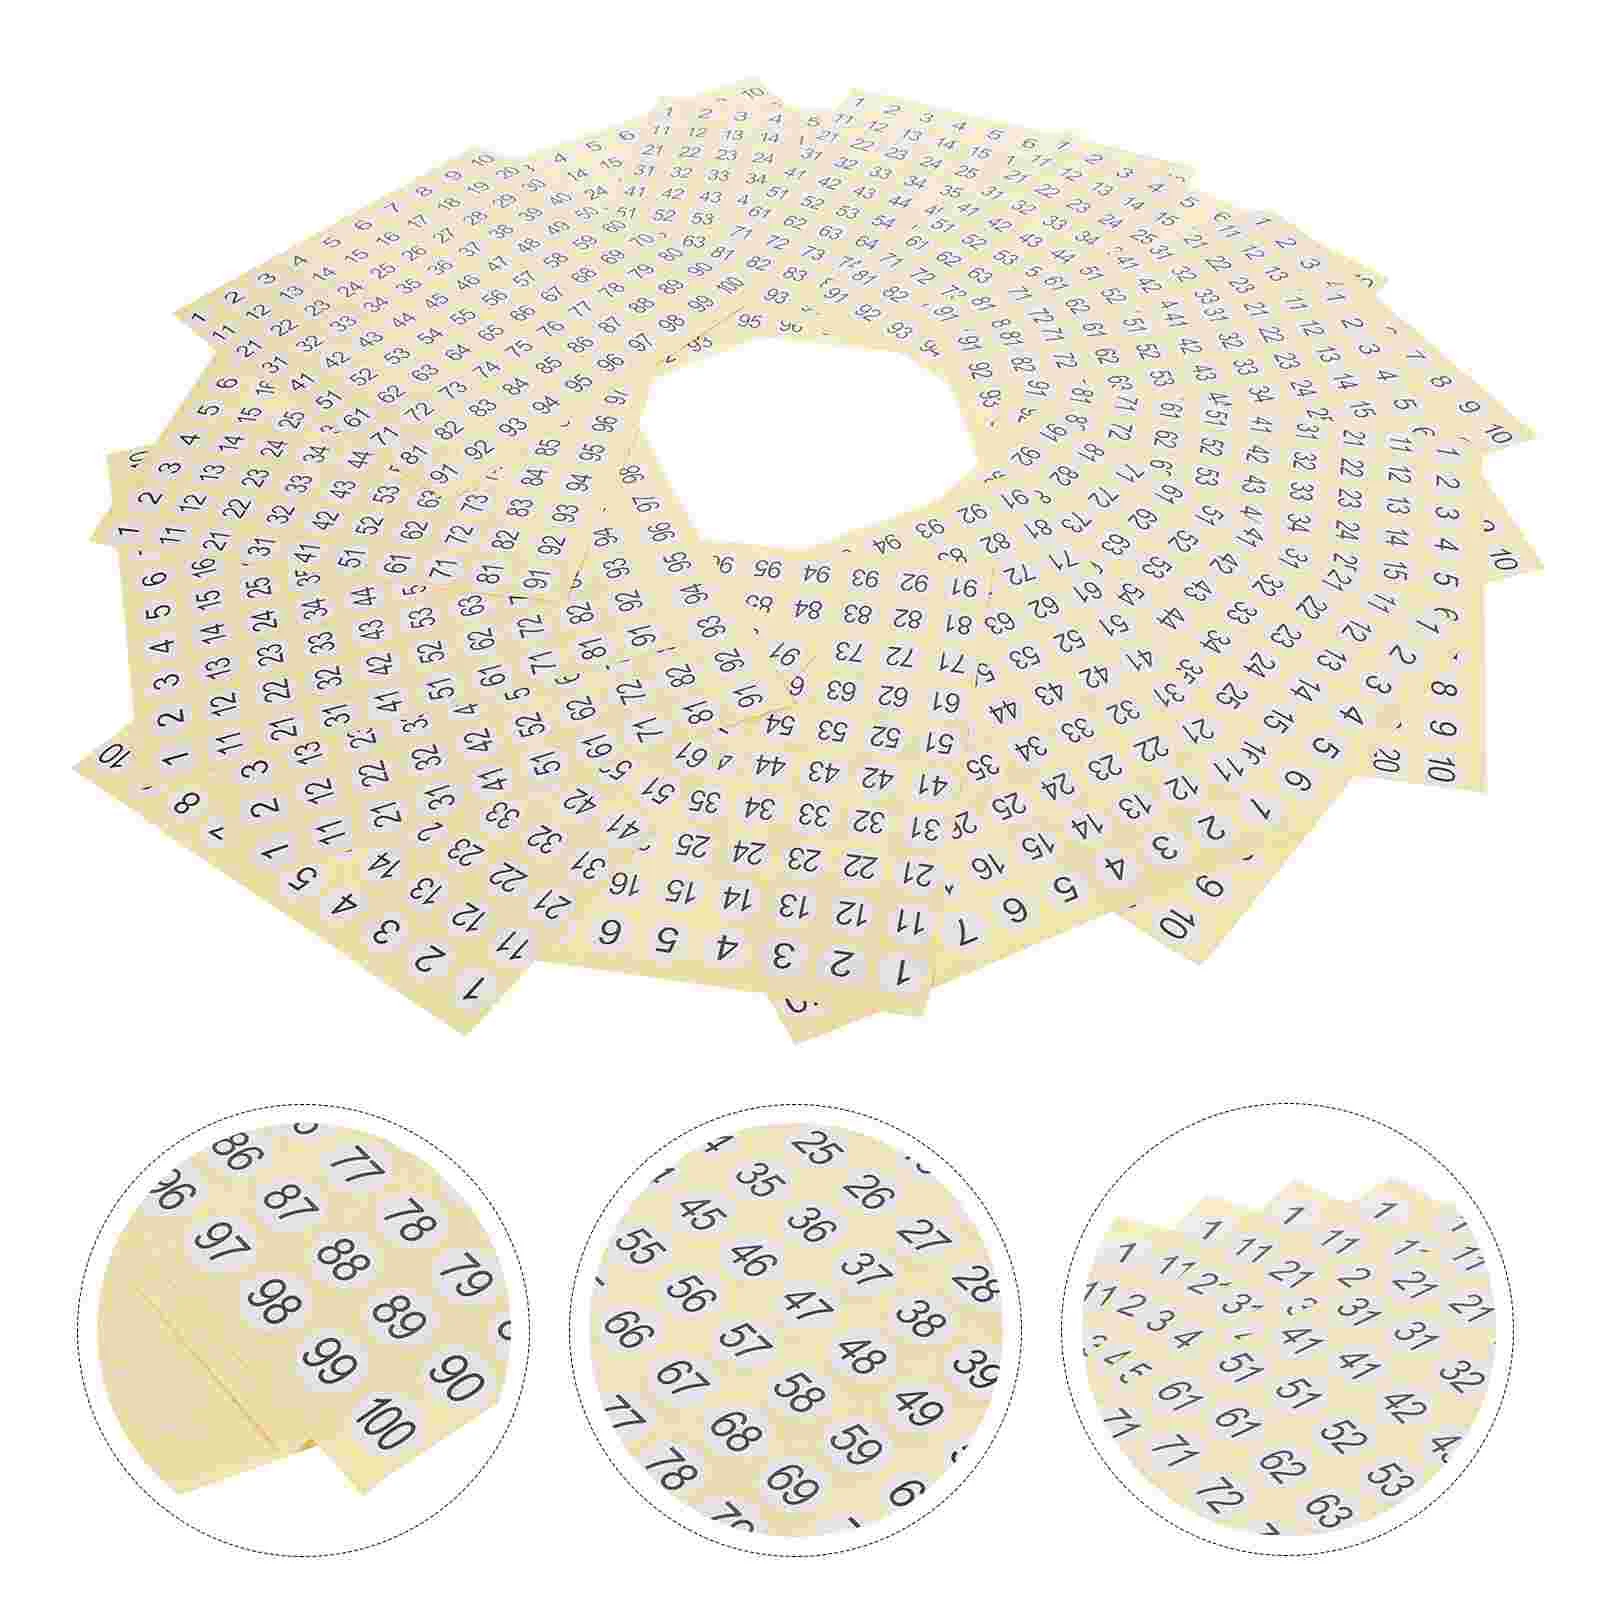 

15 Sheets Breaker Adhesive Number Stickers Labels Tags Round Numbered Sign Letter 1-100 Logo Office